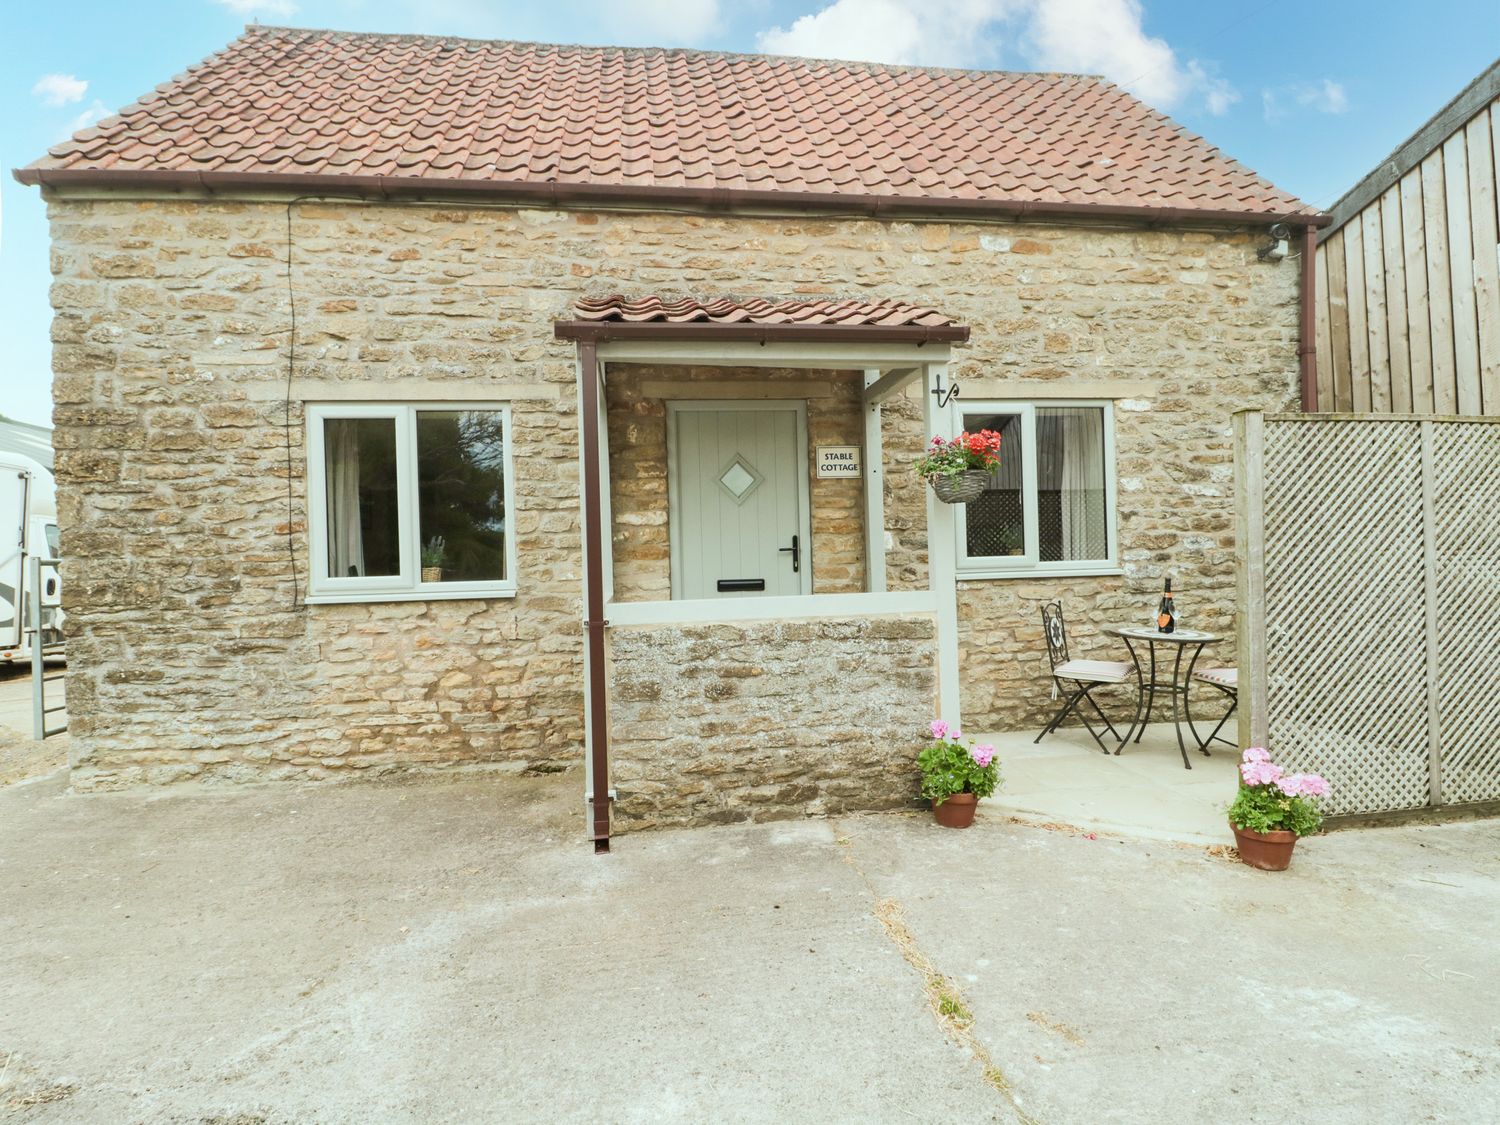 Stable Cottage, Rode Farm - Somerset & Wiltshire - 1076099 - photo 1